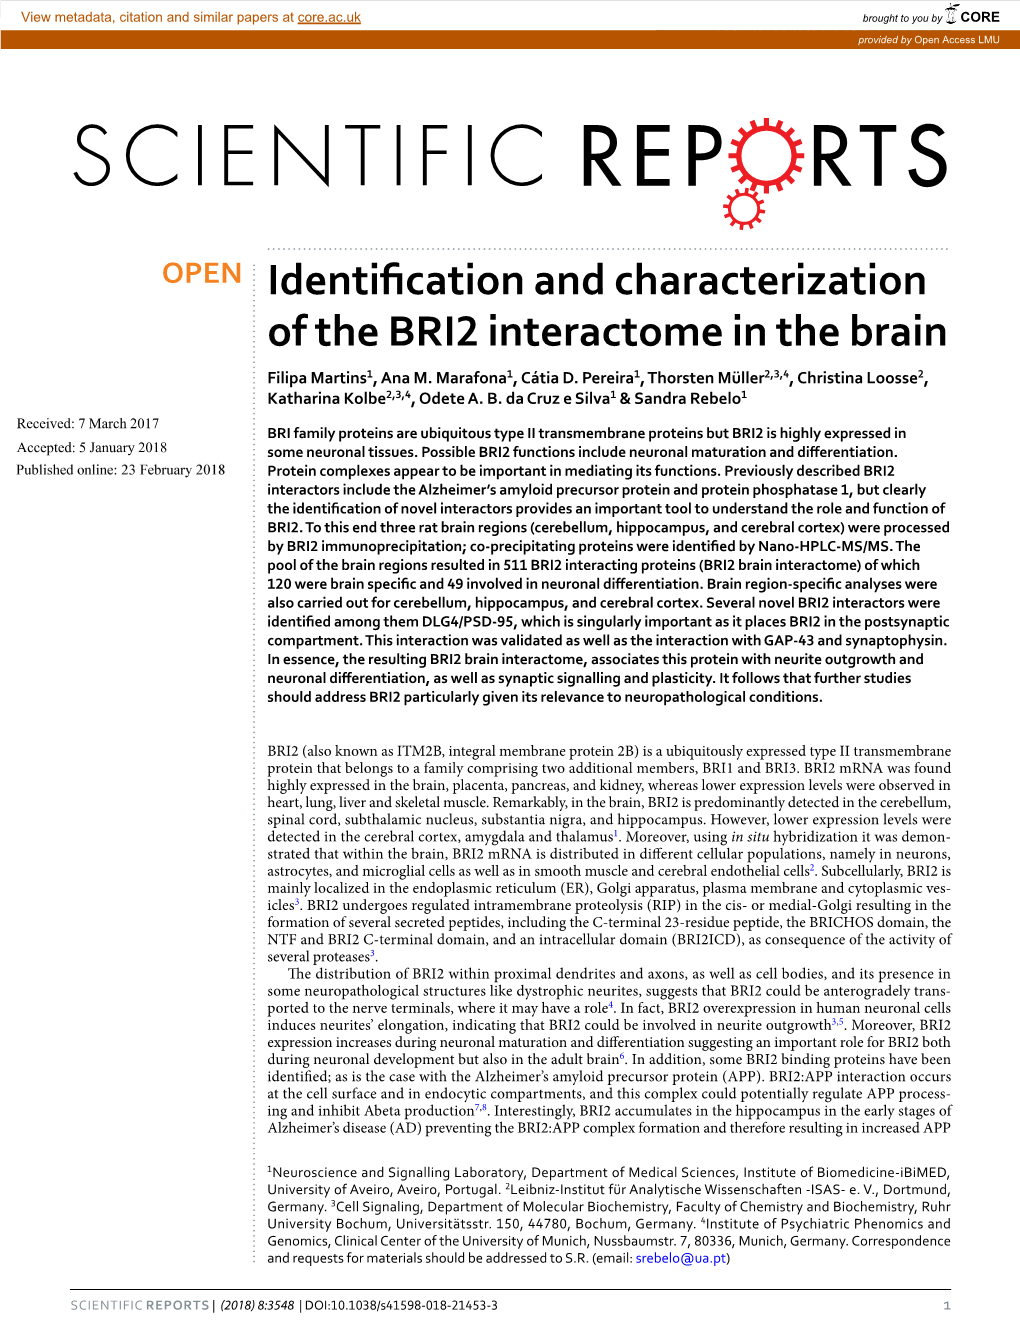 Identification and Characterization of the BRI2 Interactome in the Brain